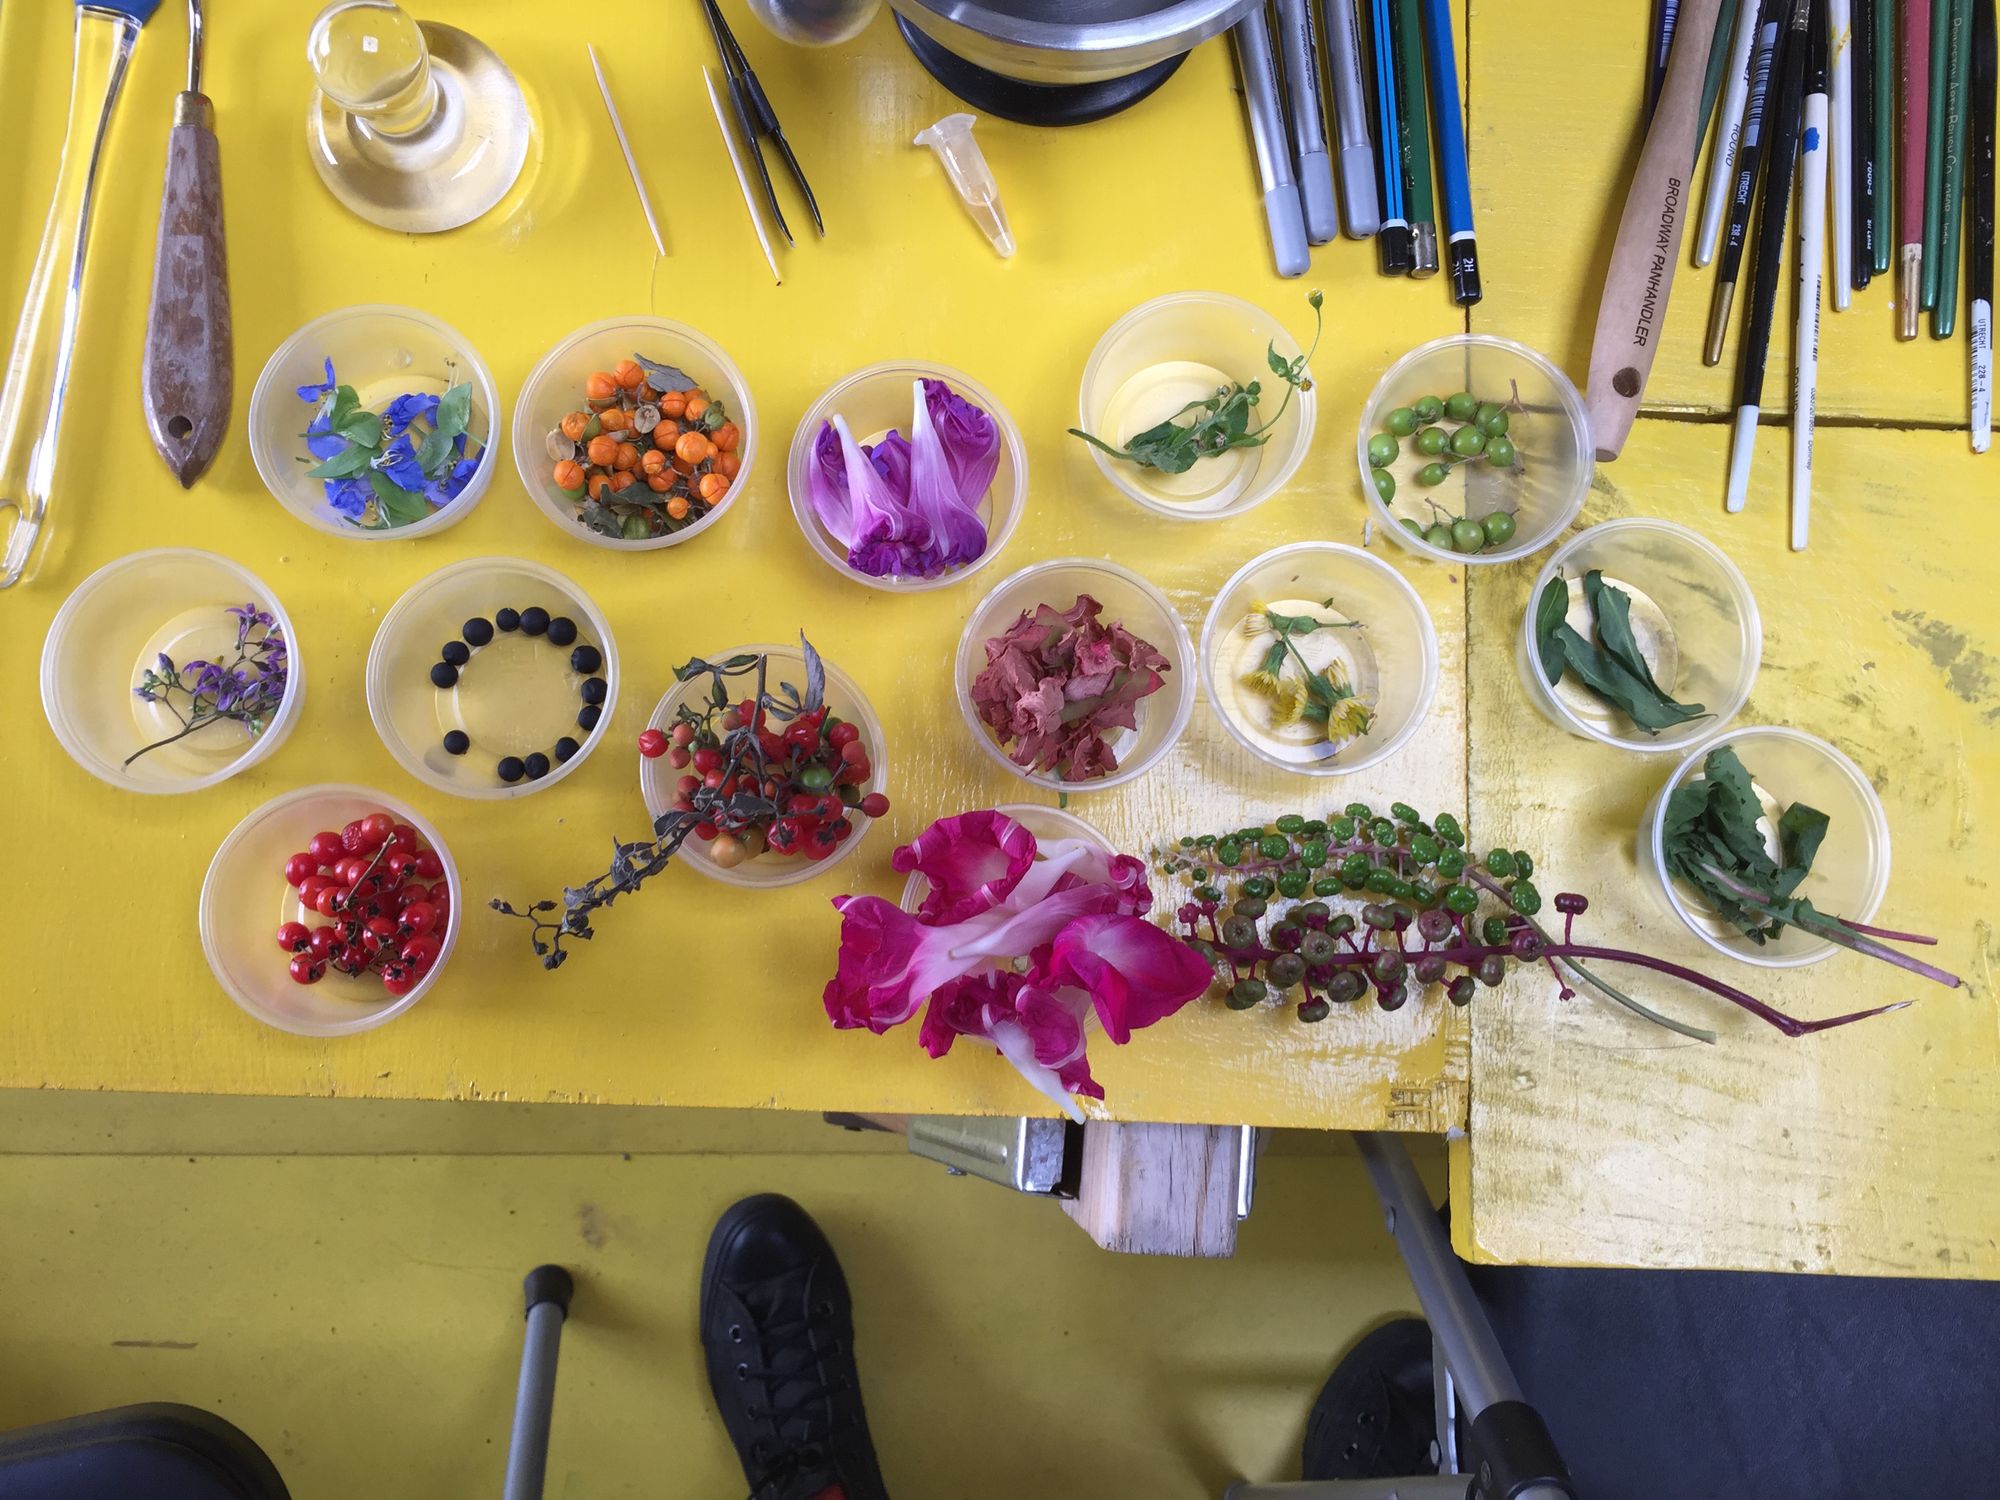 a yellow table with small tupperware containers filled with colorful (purple, orange, blue, yellow, pink, green) plant materials that are also weeds as well as pigments